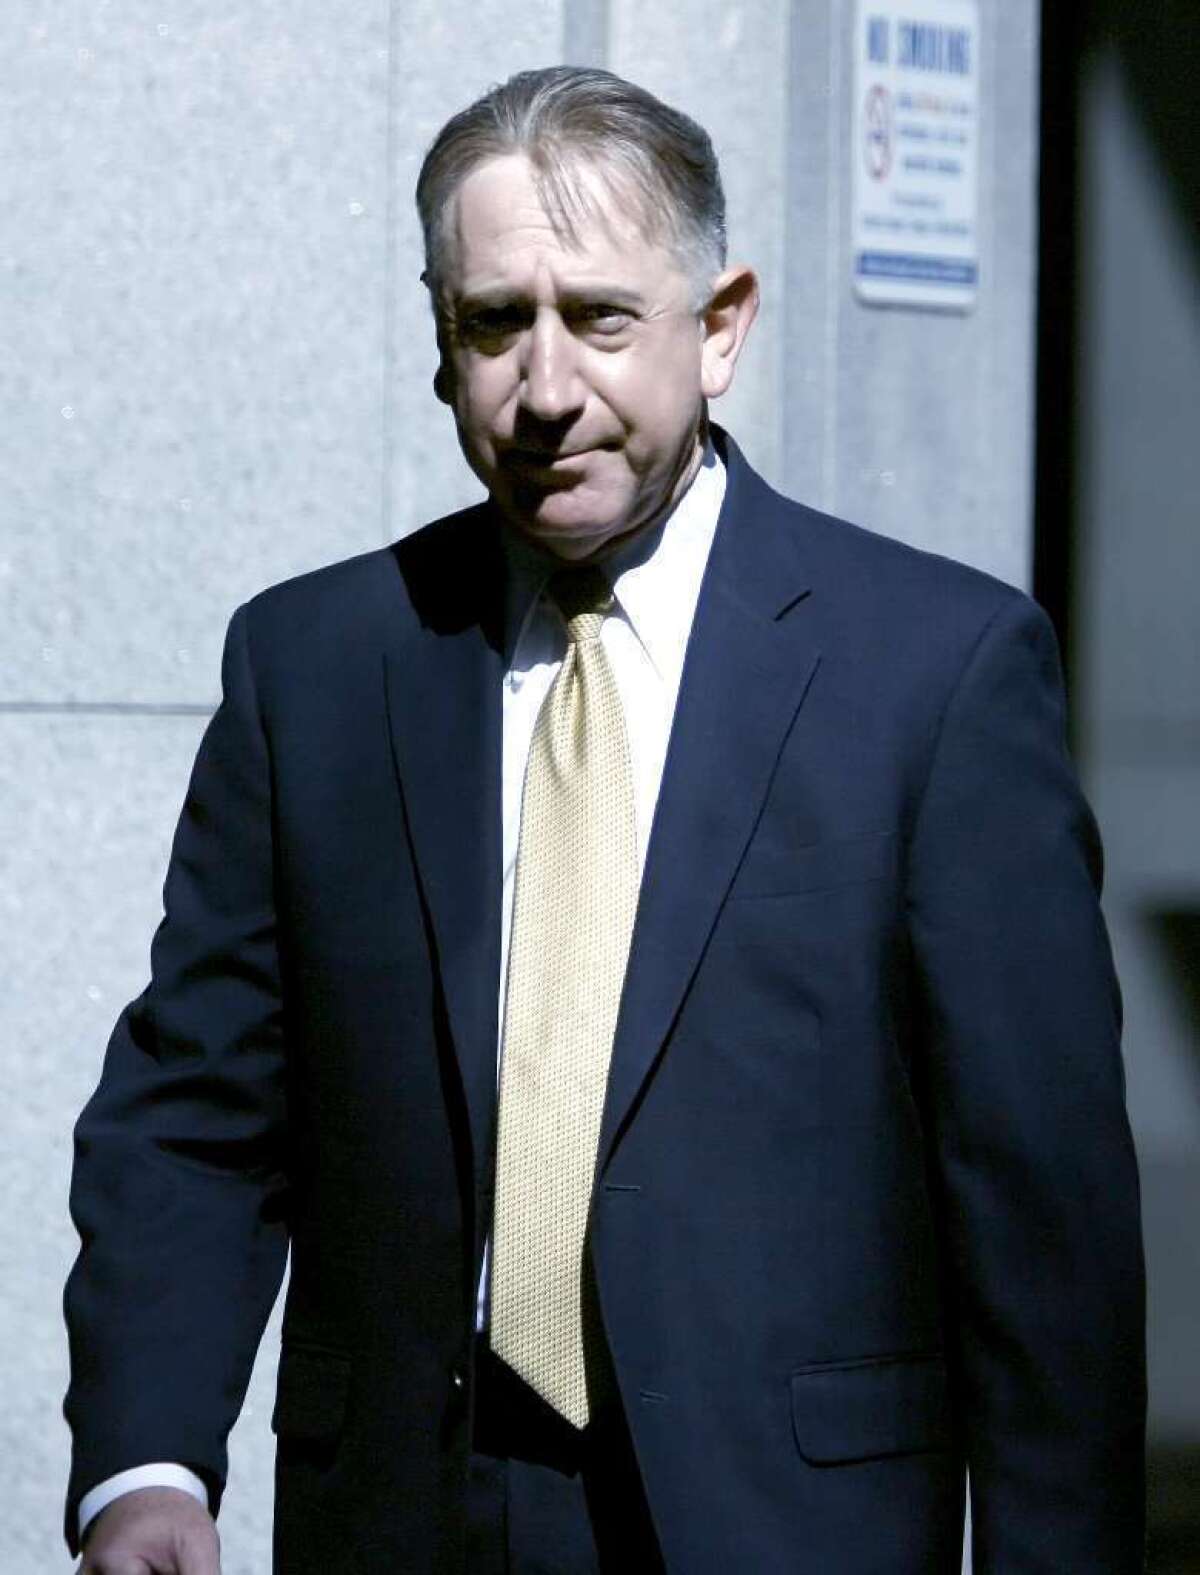 File Photo: Former Glendale Councilman John Drayman arrives to be arraigned in May 2012 at the C. S. Foltz Criminal Justice Center in Los Angeles. Los Angeles Superior Court Judge Stephen A. Marcus rejected a second plea deal from Drayman in a downtown courtroom on Monday, March 10, 2014. Drayman allegedly embezzled at least $304,000 from Montrose farmerÃ‚Â¿s market.